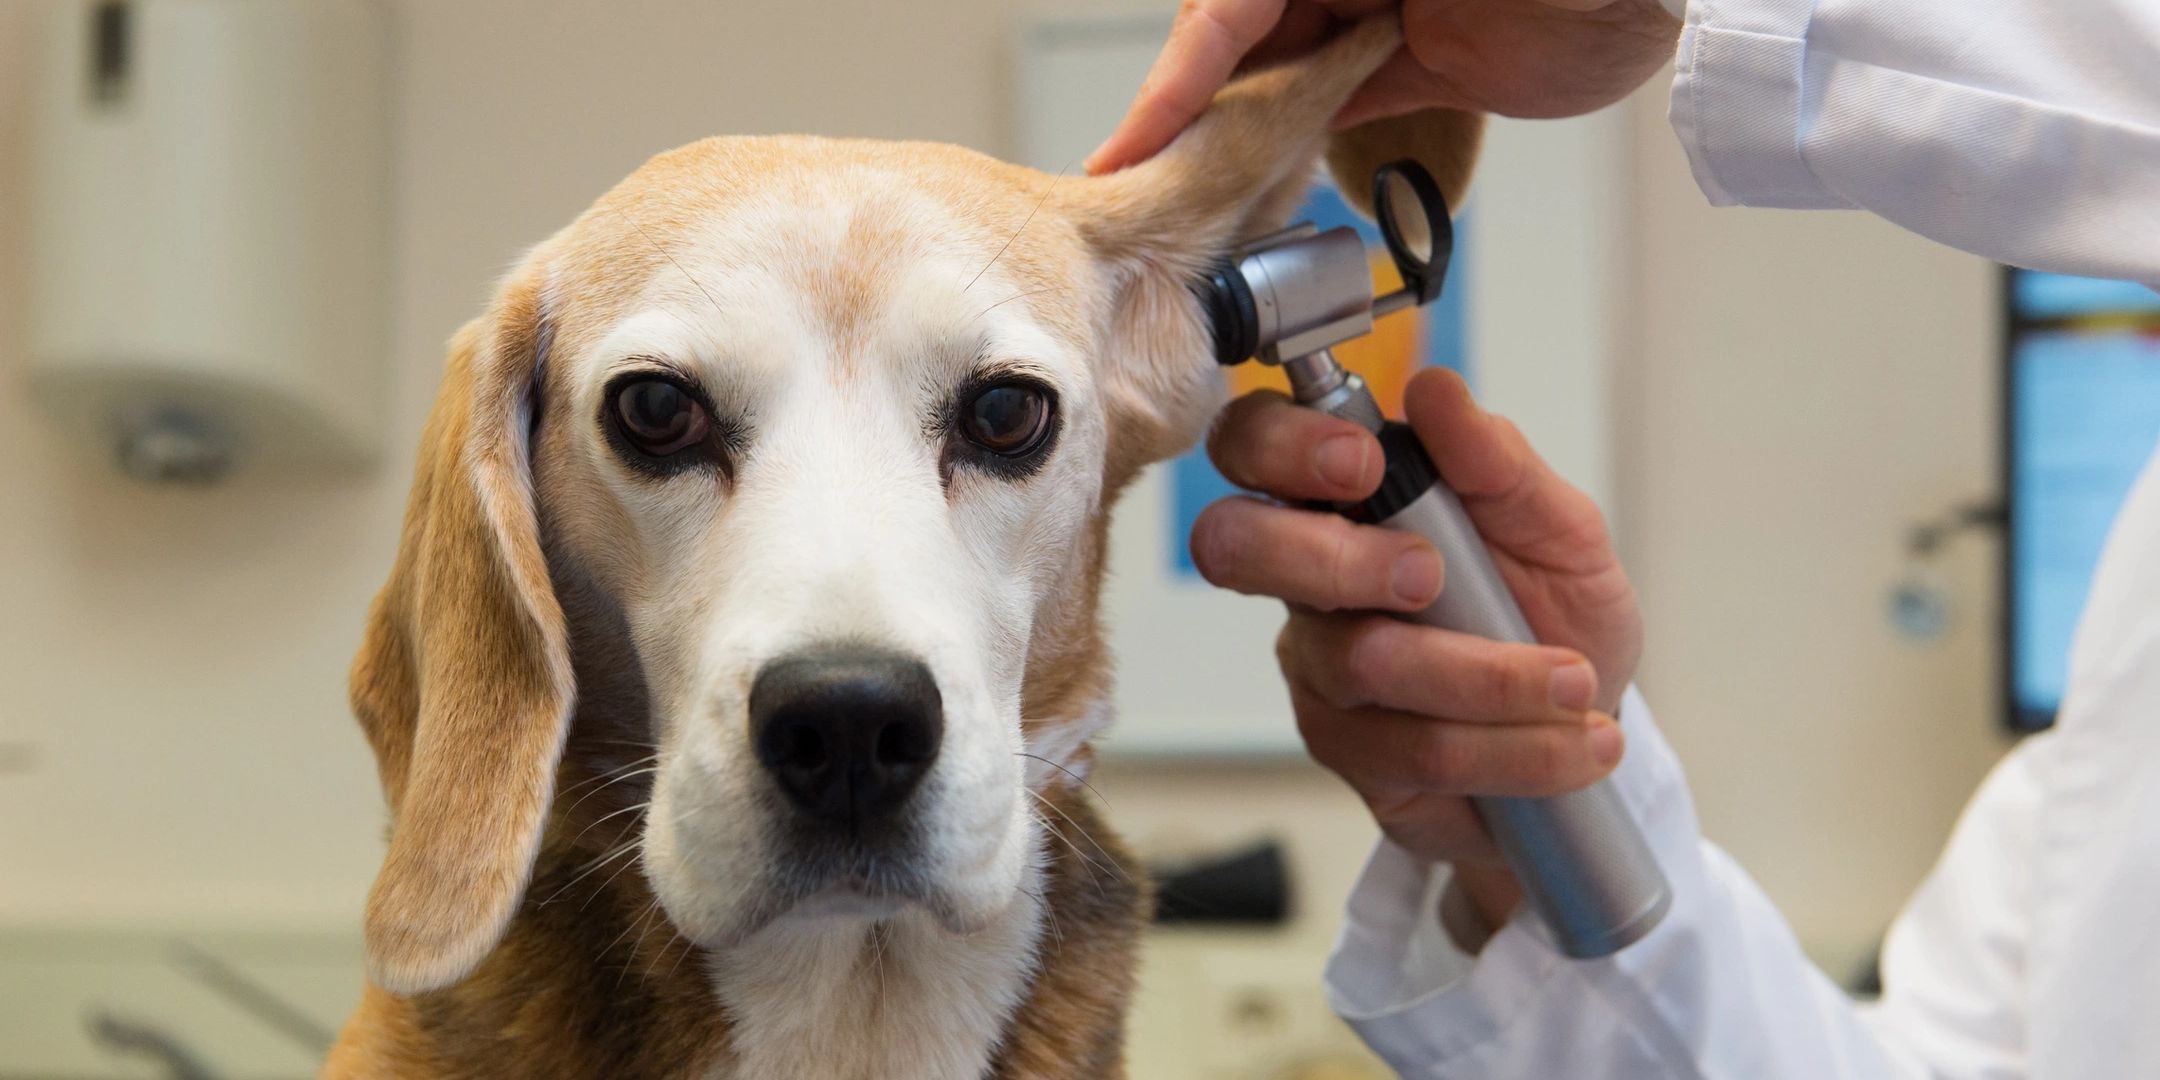 Thorough physical examination of a healthy-looking dog using otoscope in clean hospital enviroment